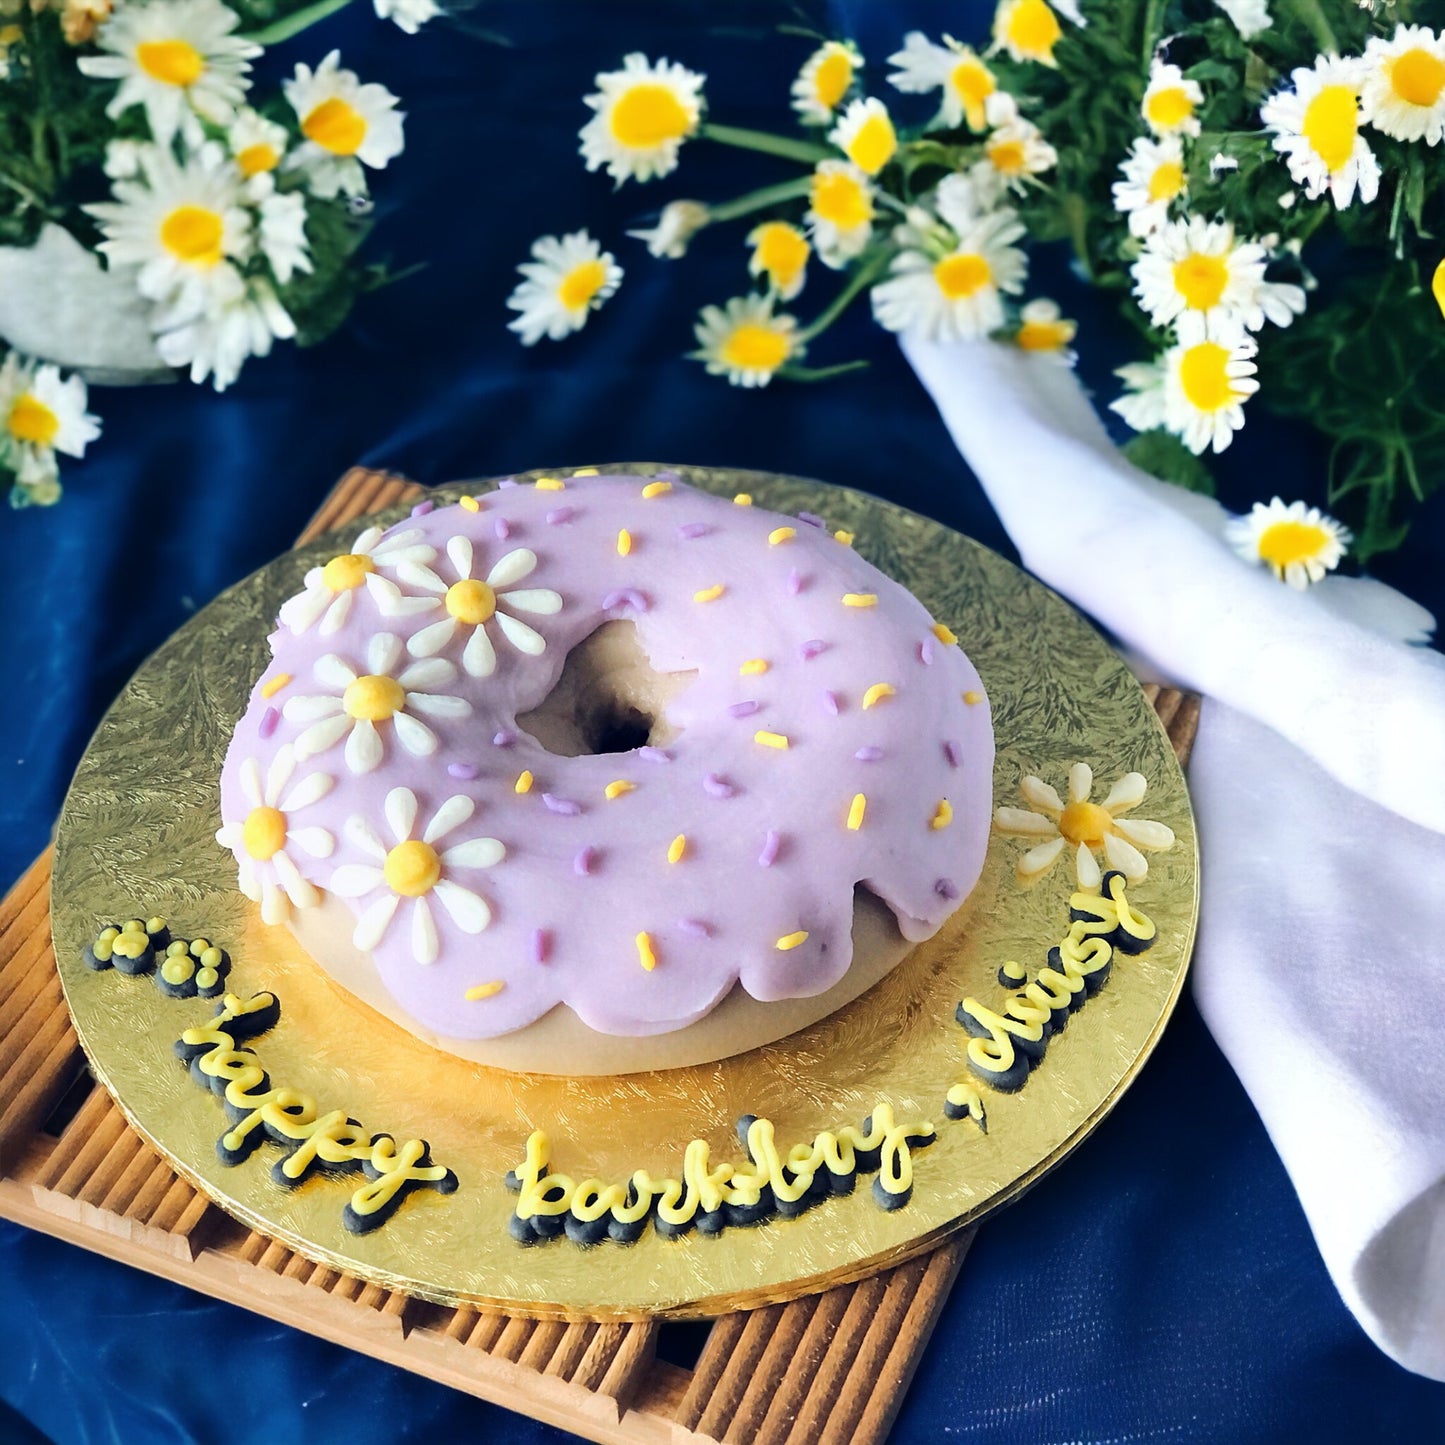 3D Donut Cake with Flowers & Sprinkles